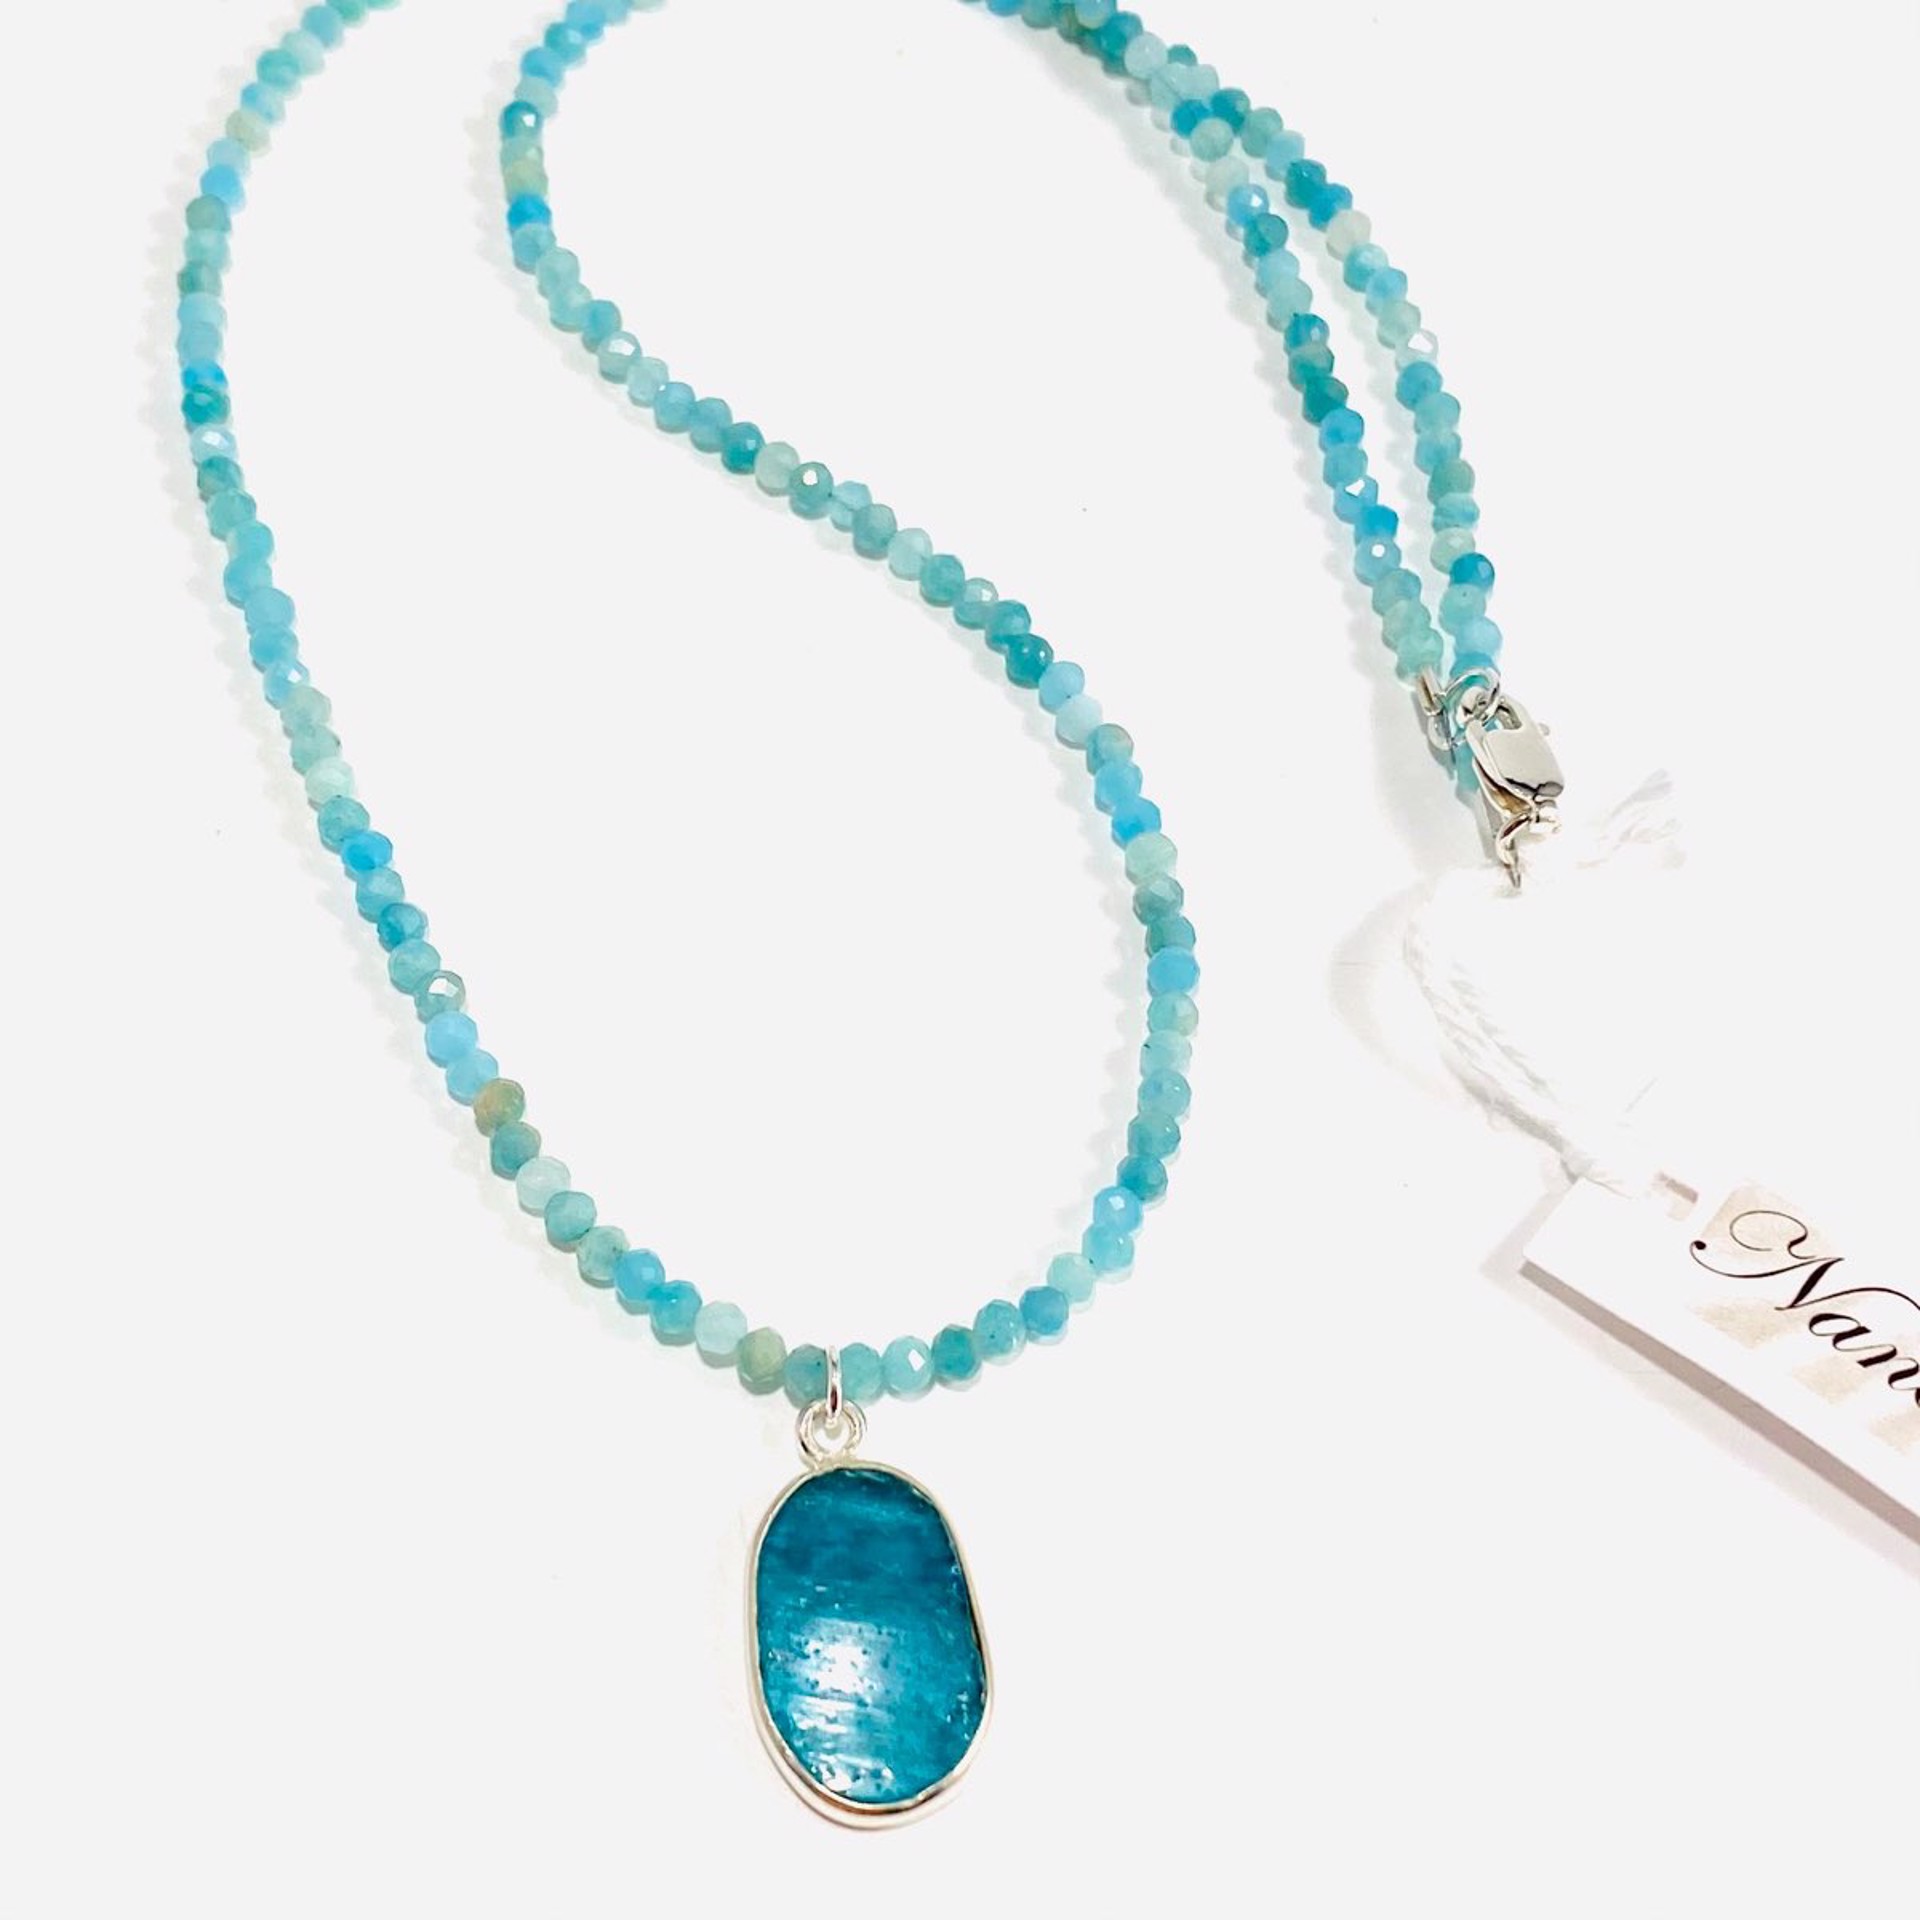 NT22-158 Faceted  Amazonite  Roman Glass Pendant Necklace by Nance Trueworthy